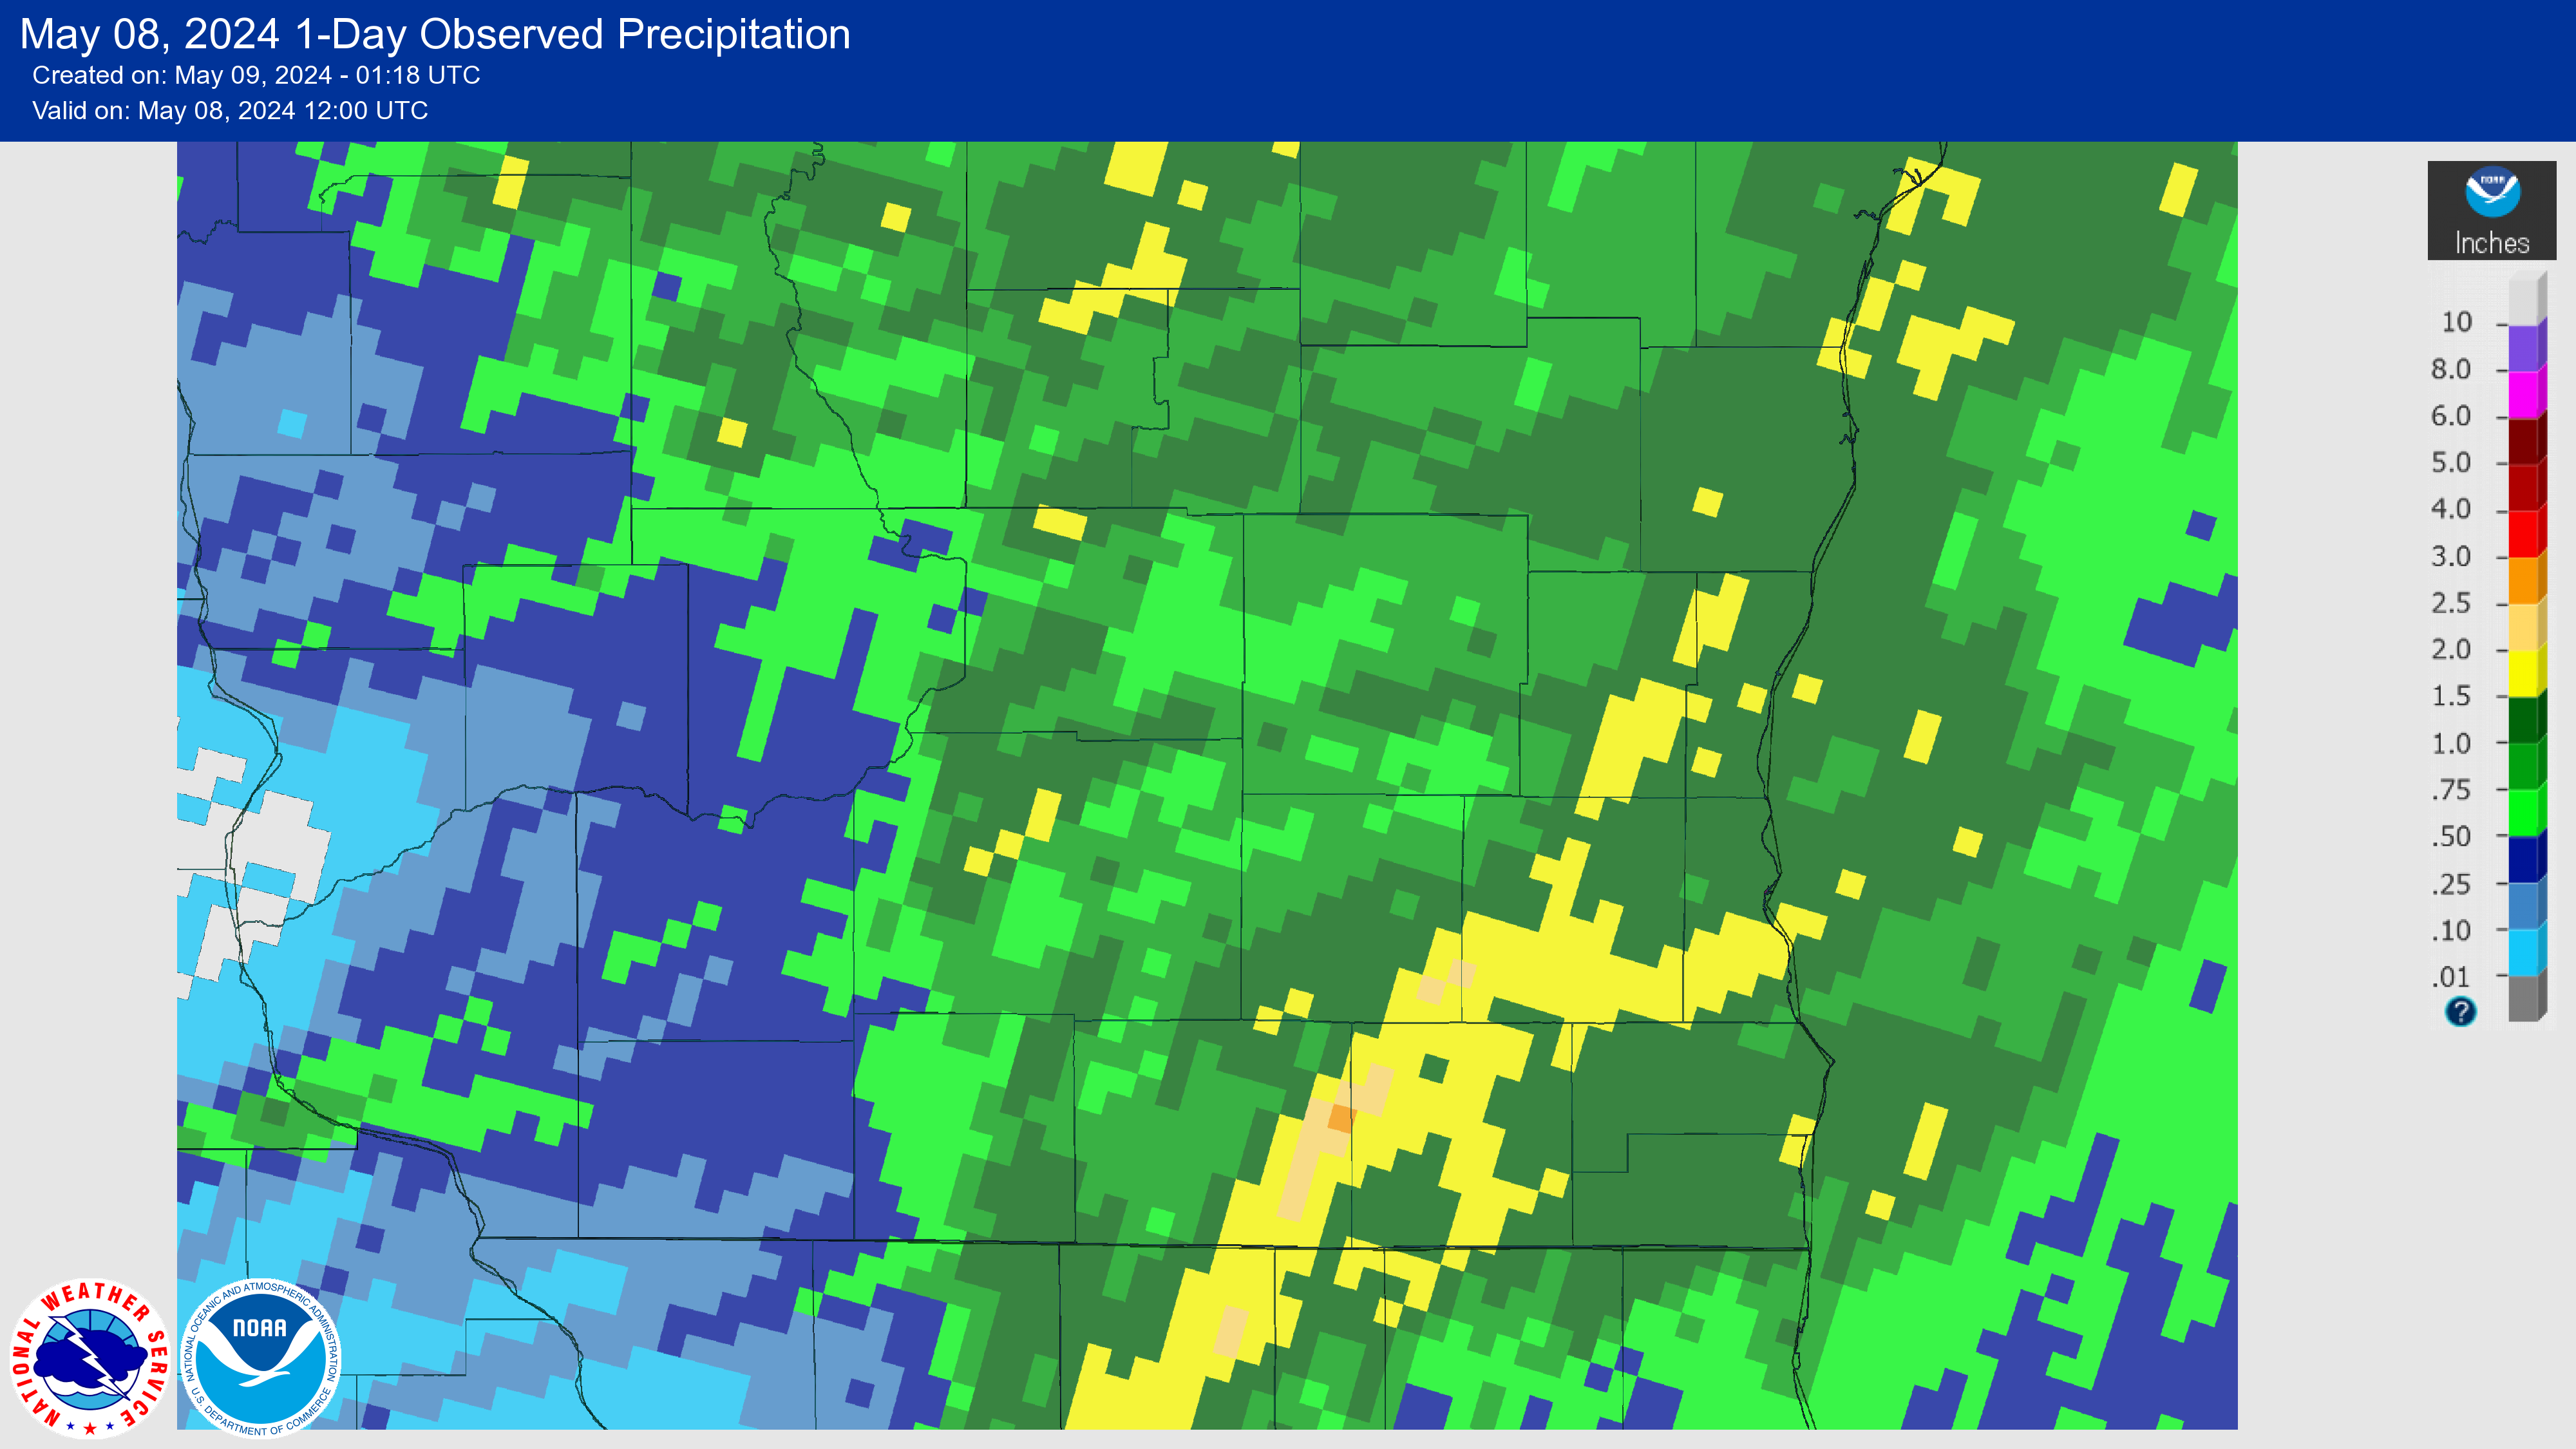 24 hour quantitative precipitation estimate showing 0.5 to 2 inches with highest amounts in southeast WI